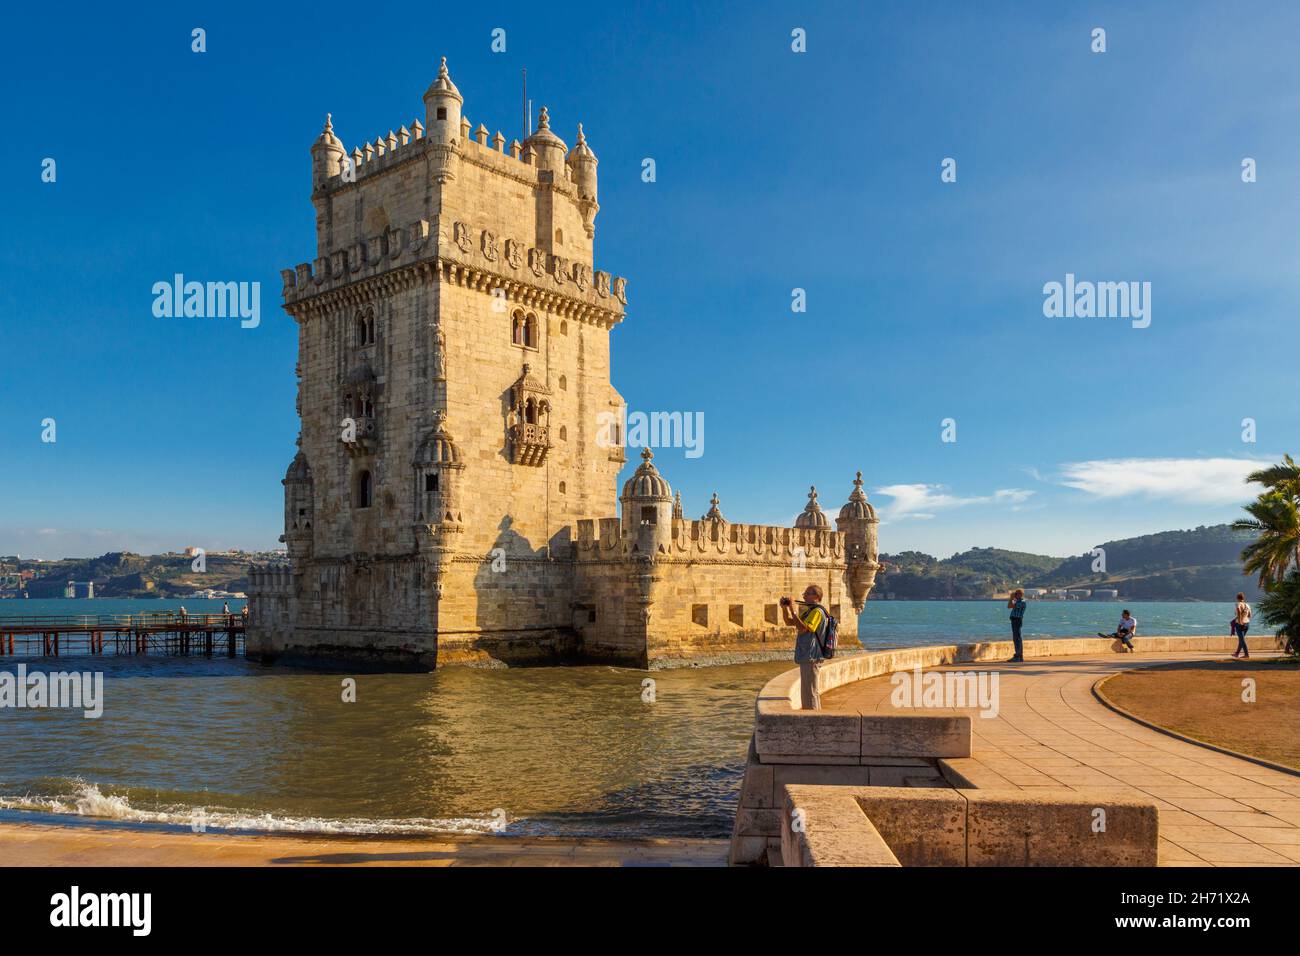 Lisbon, Portugal.  The 16th century Torre de Belem or Belem tower.  The tower is an important example of Manueline architecture and a UNESCO World Her Stock Photo